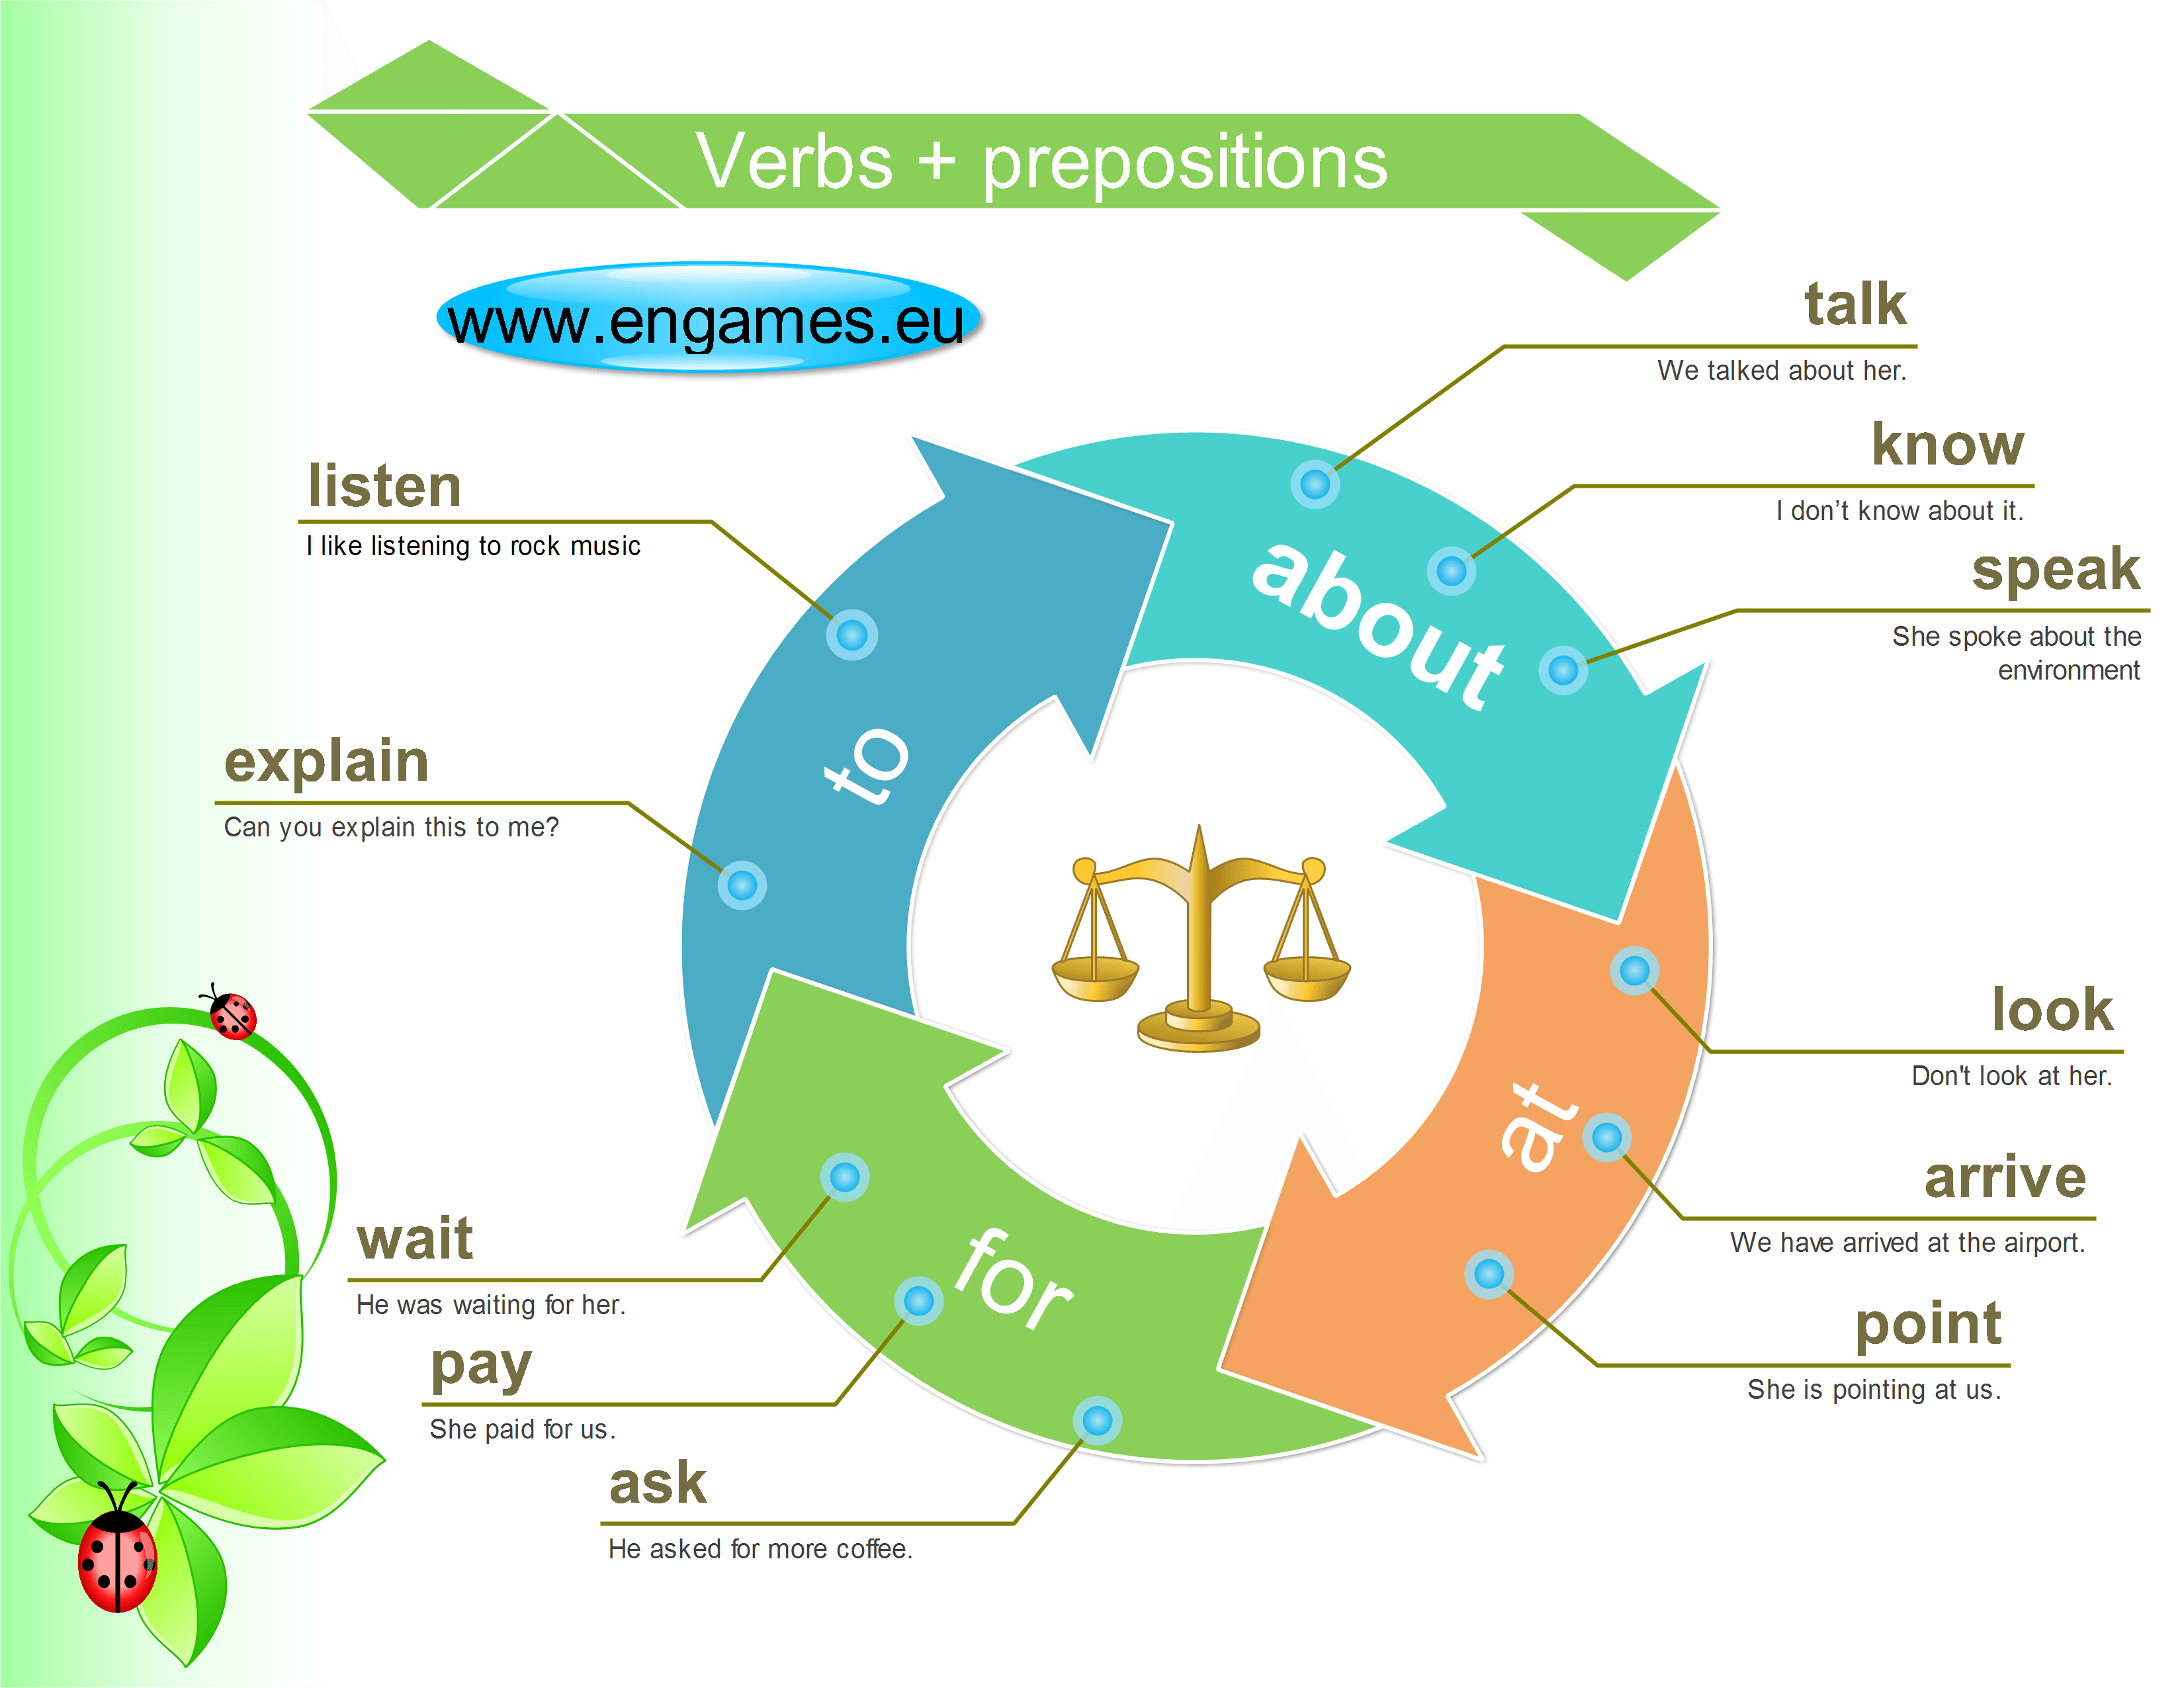 Verb preposition. Verbs with prepositions. Verbs with prepositions в английском языке. Phrasal verbs with prepositions.